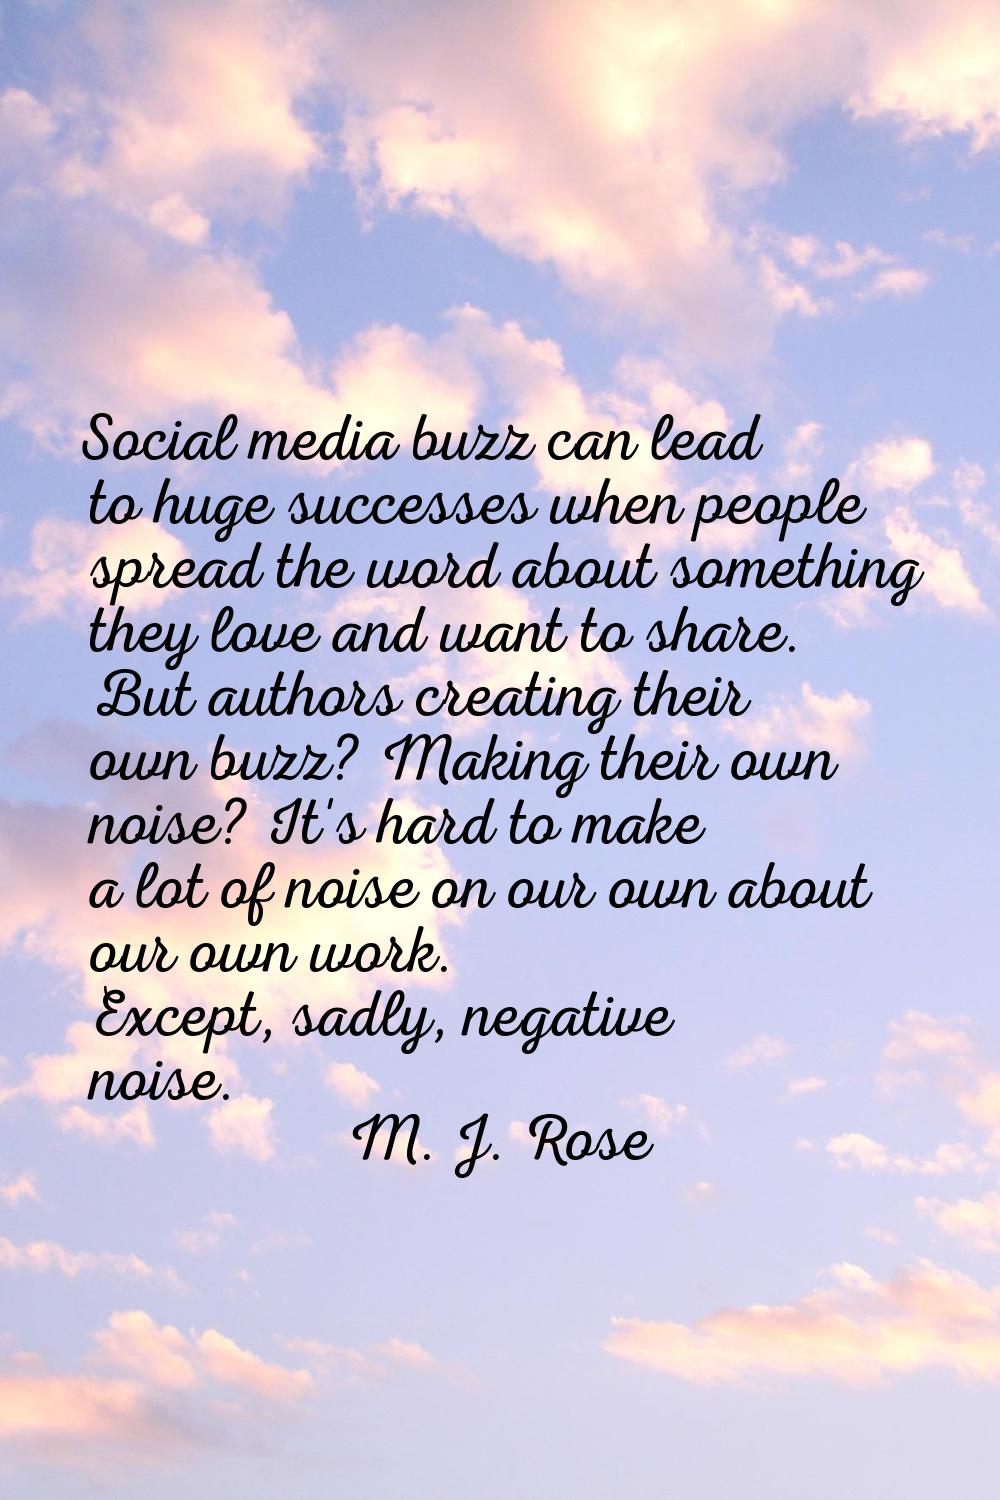 Social media buzz can lead to huge successes when people spread the word about something they love 